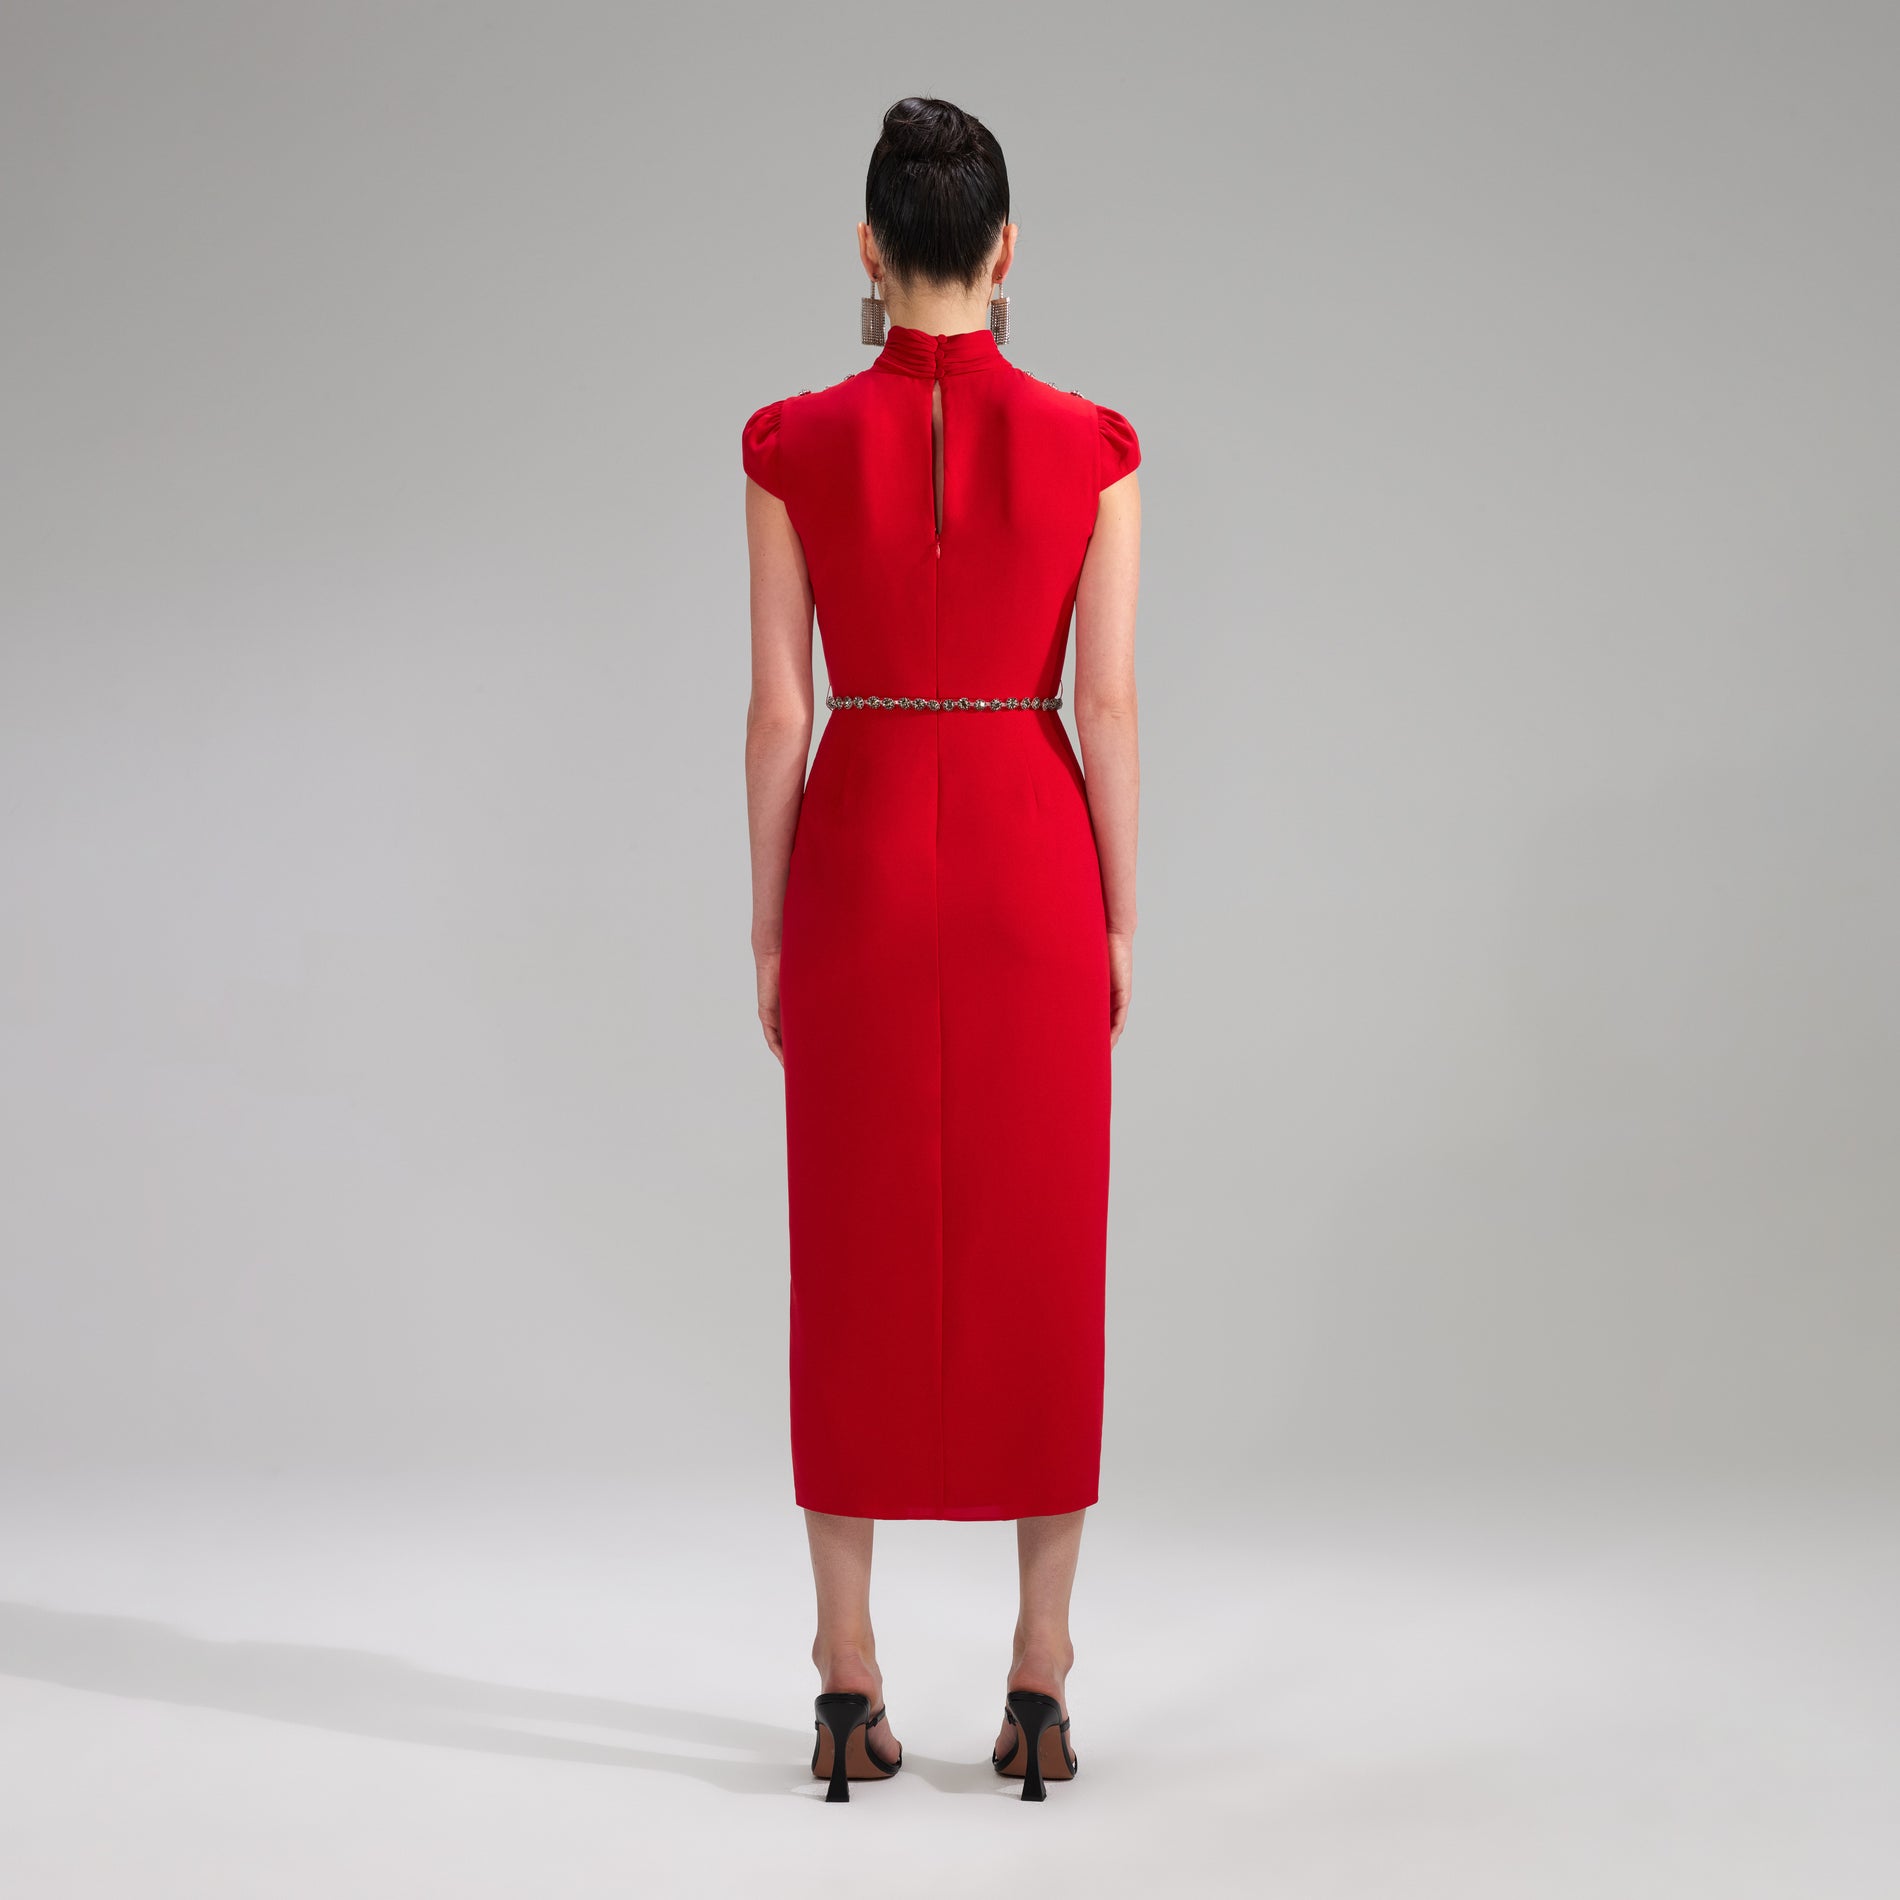 A woman wearing the Red Stretch Crepe Ruched Midi Dress